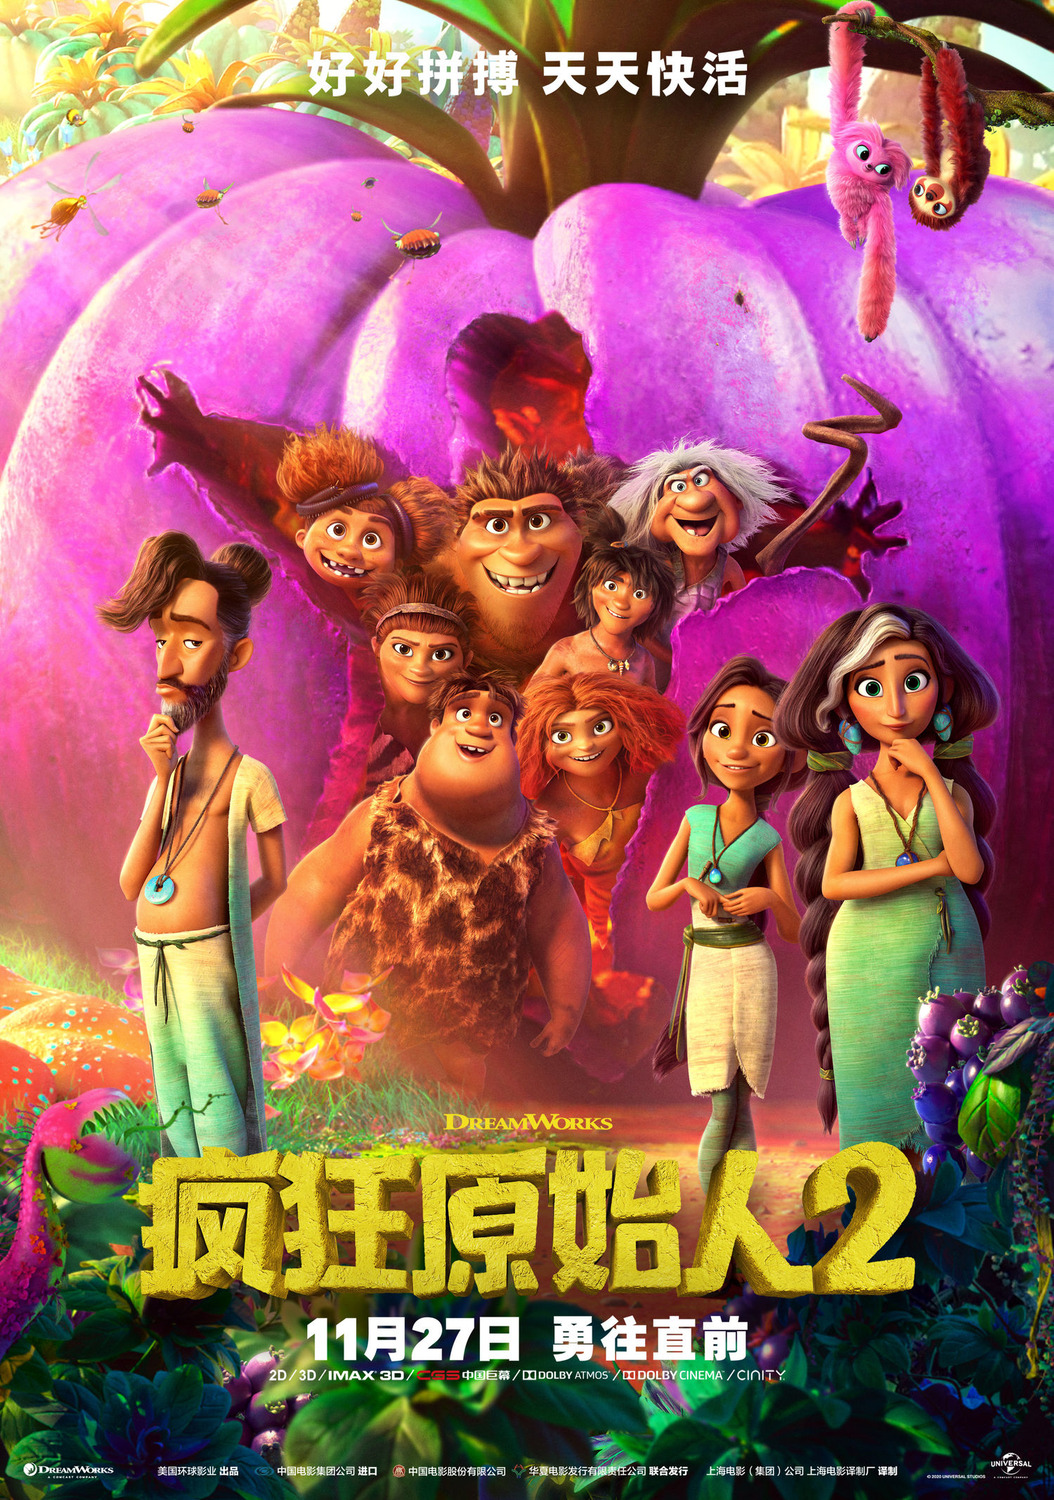 Extra Large Movie Poster Image for The Croods: A New Age (#5 of 5)